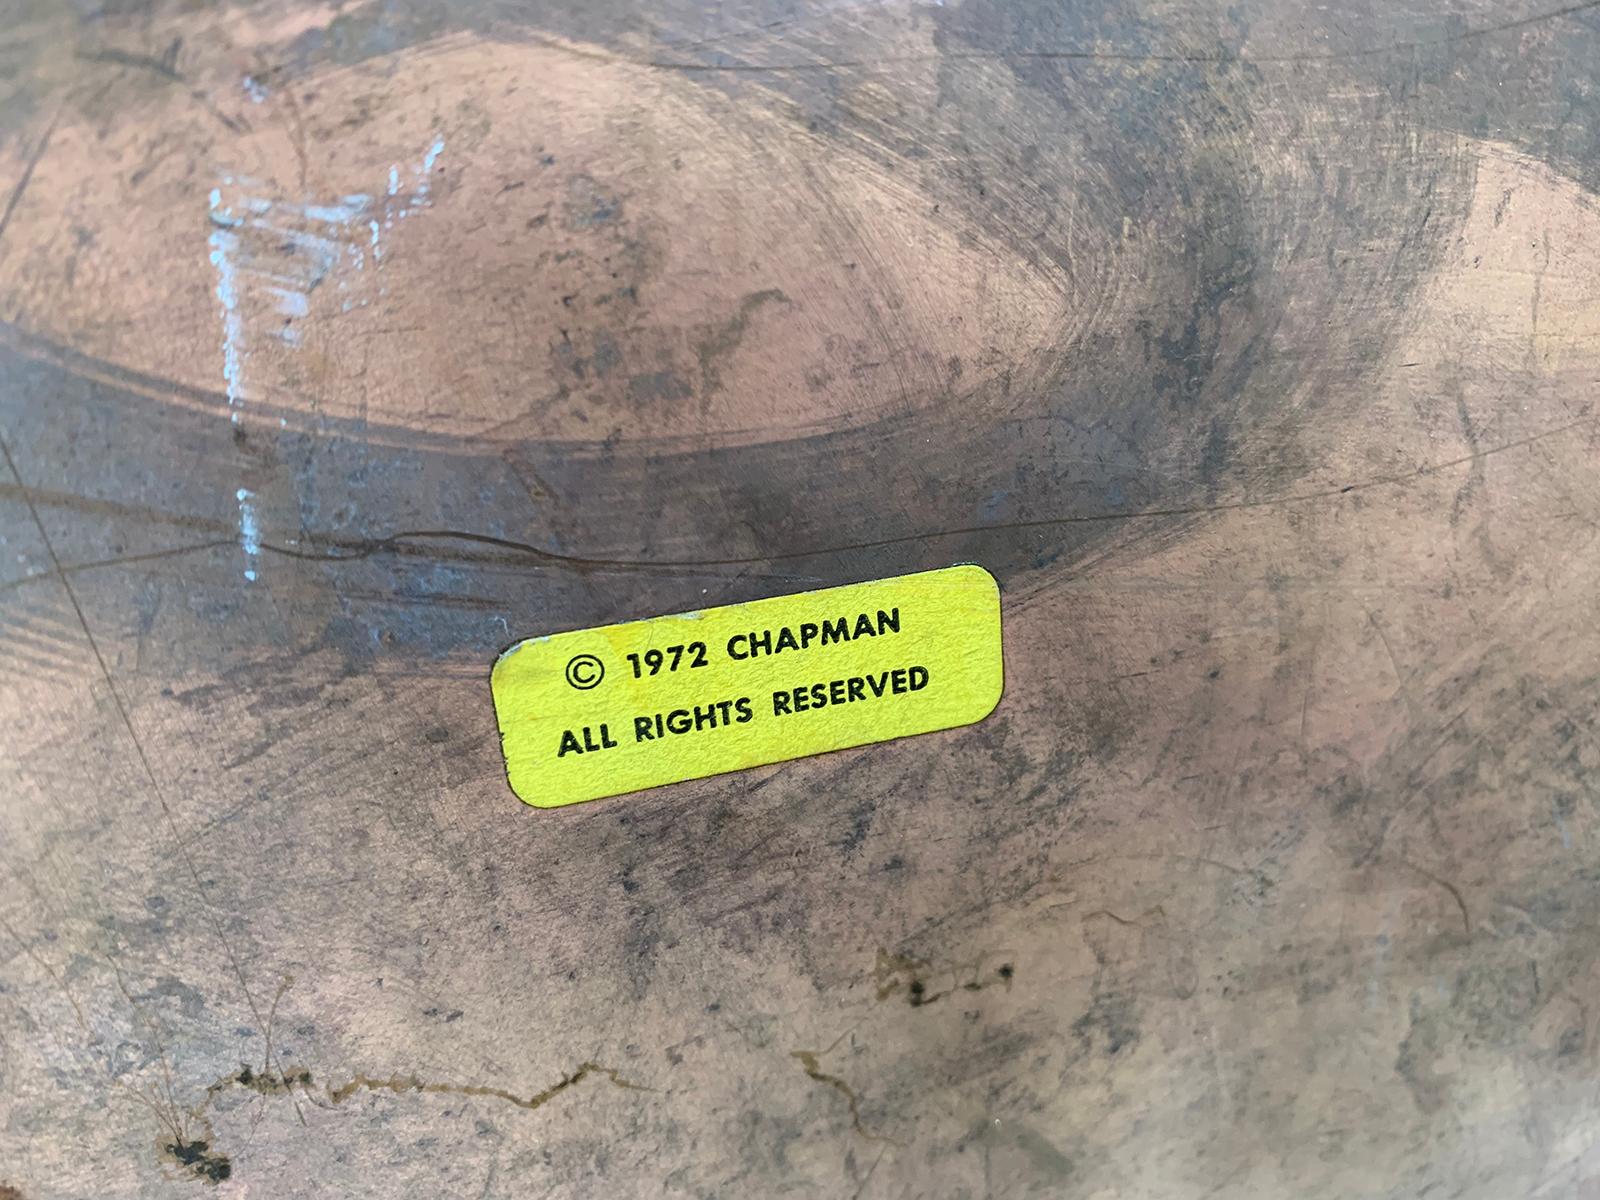 20th century Chapman brass container, labeled, circa 1972.